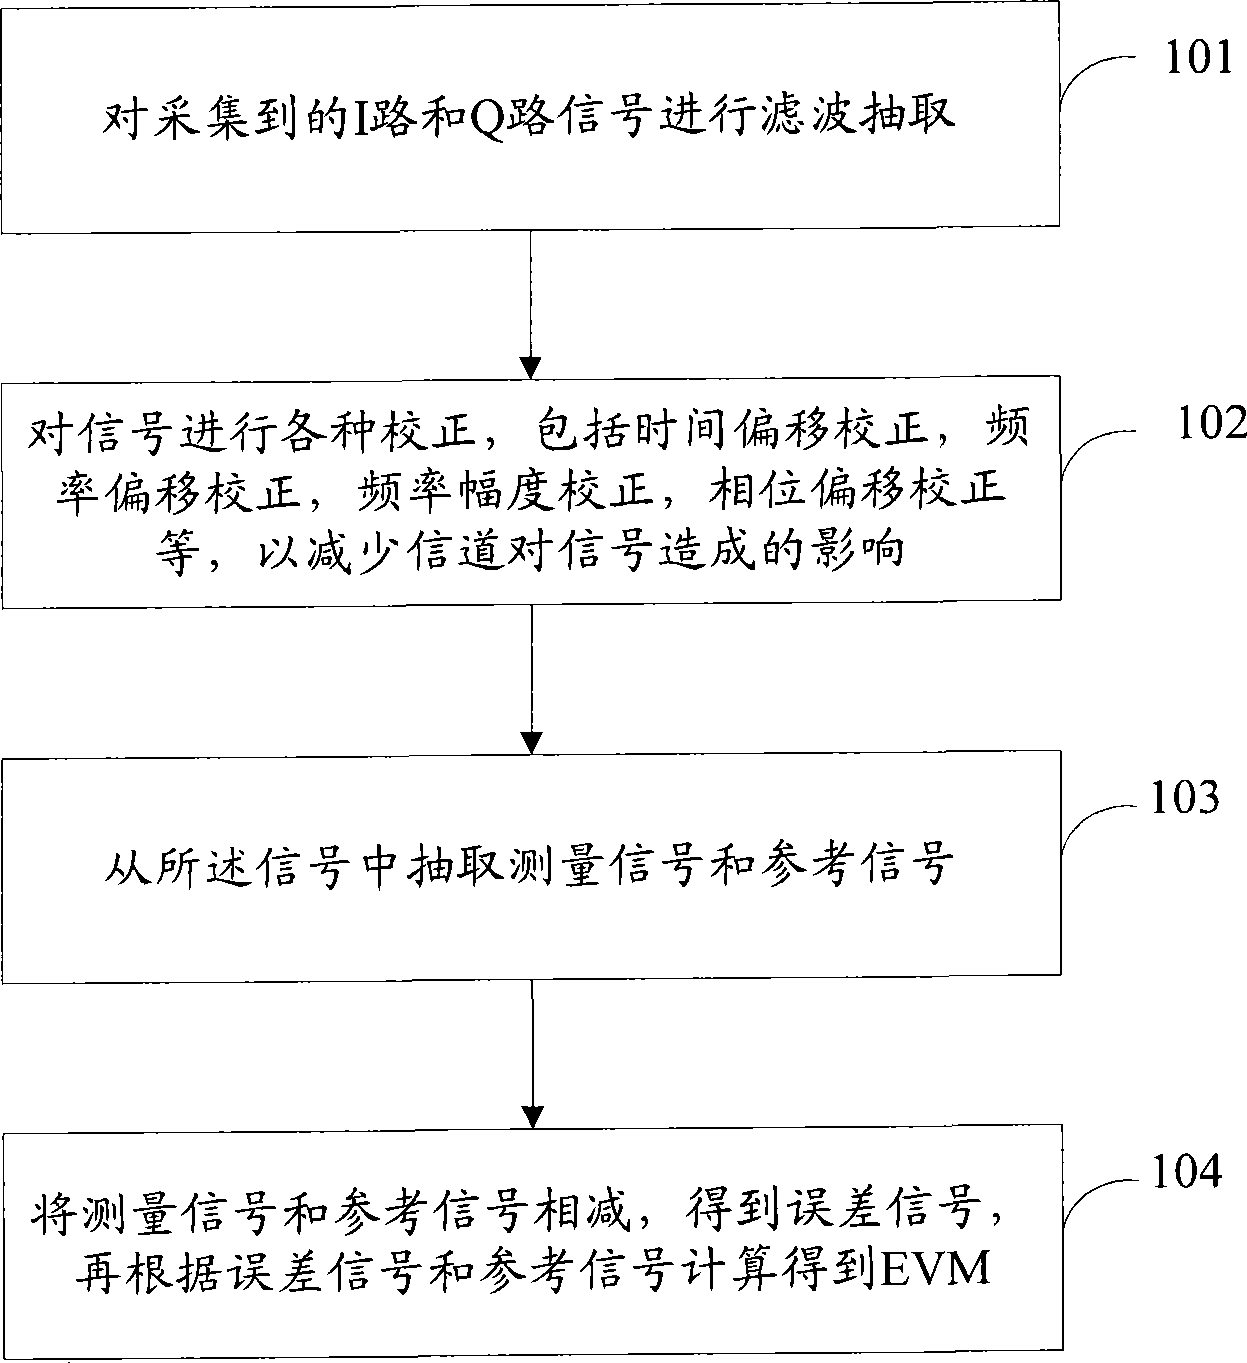 Method and apparatus for estimating modulation accuracy of OFDM_TDD system